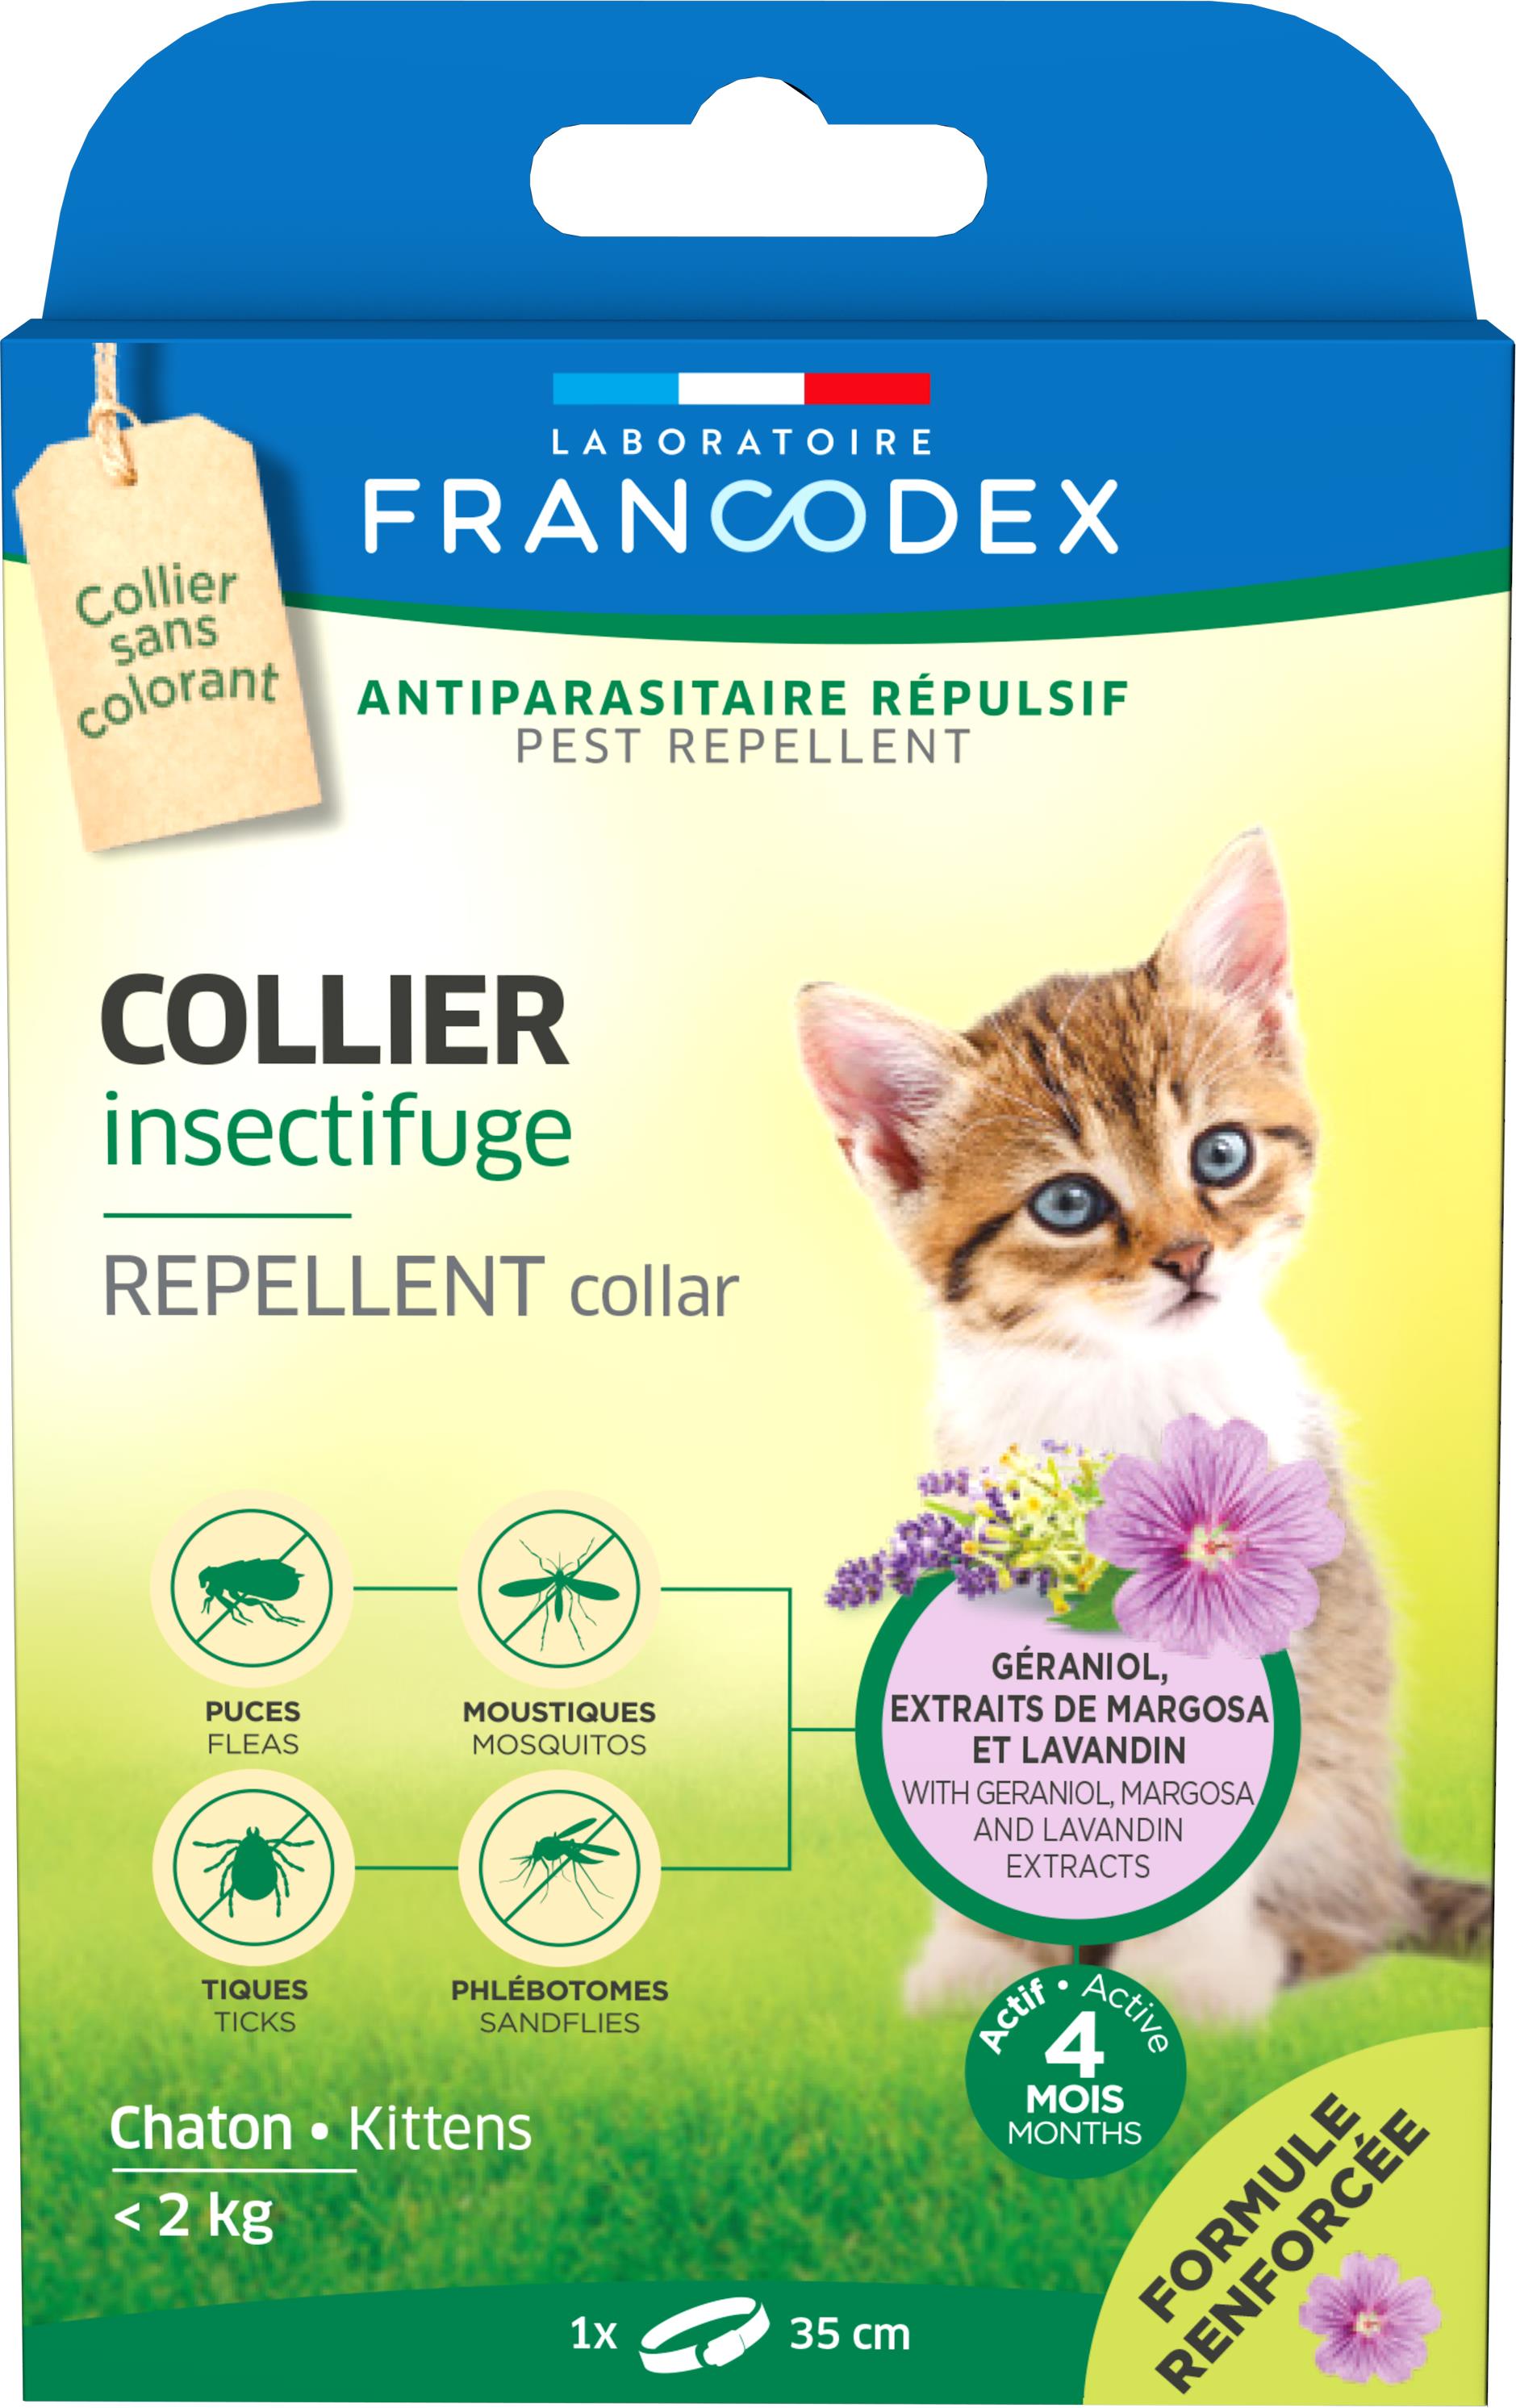 soin chat - francodex collier insectifuge chatons moins de 2 kg - 35 cm